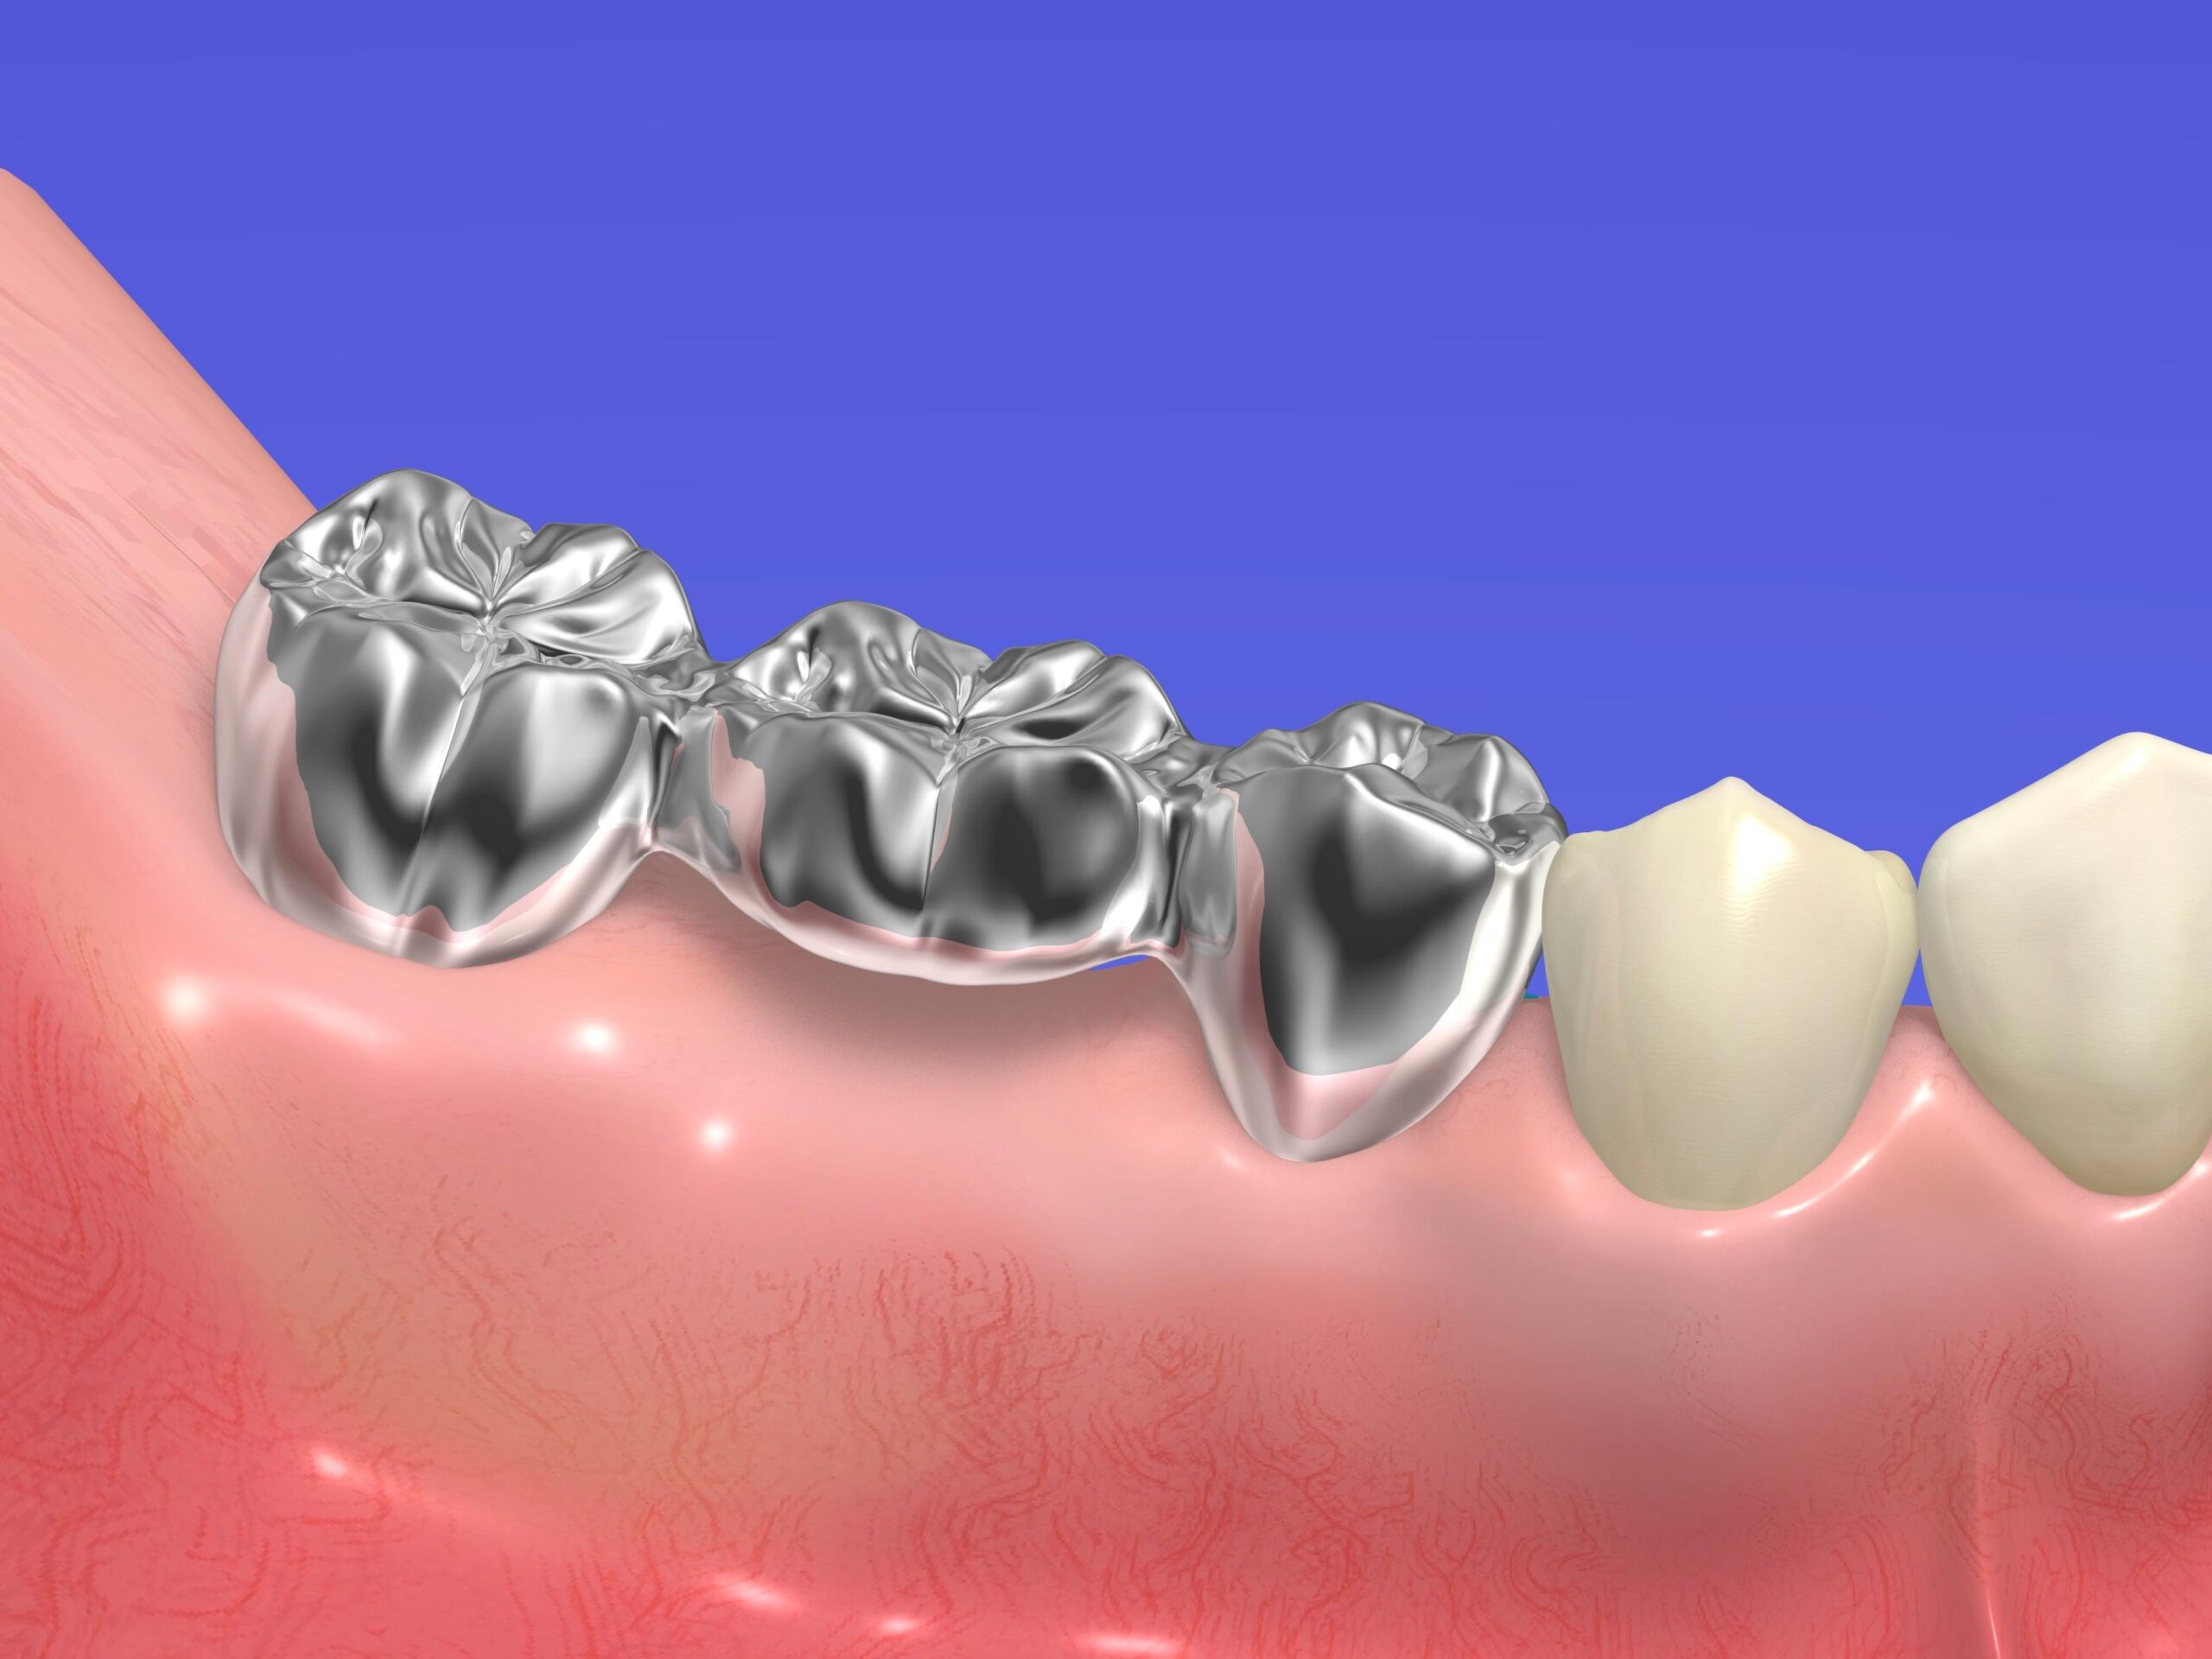 silver tooth dental treatment